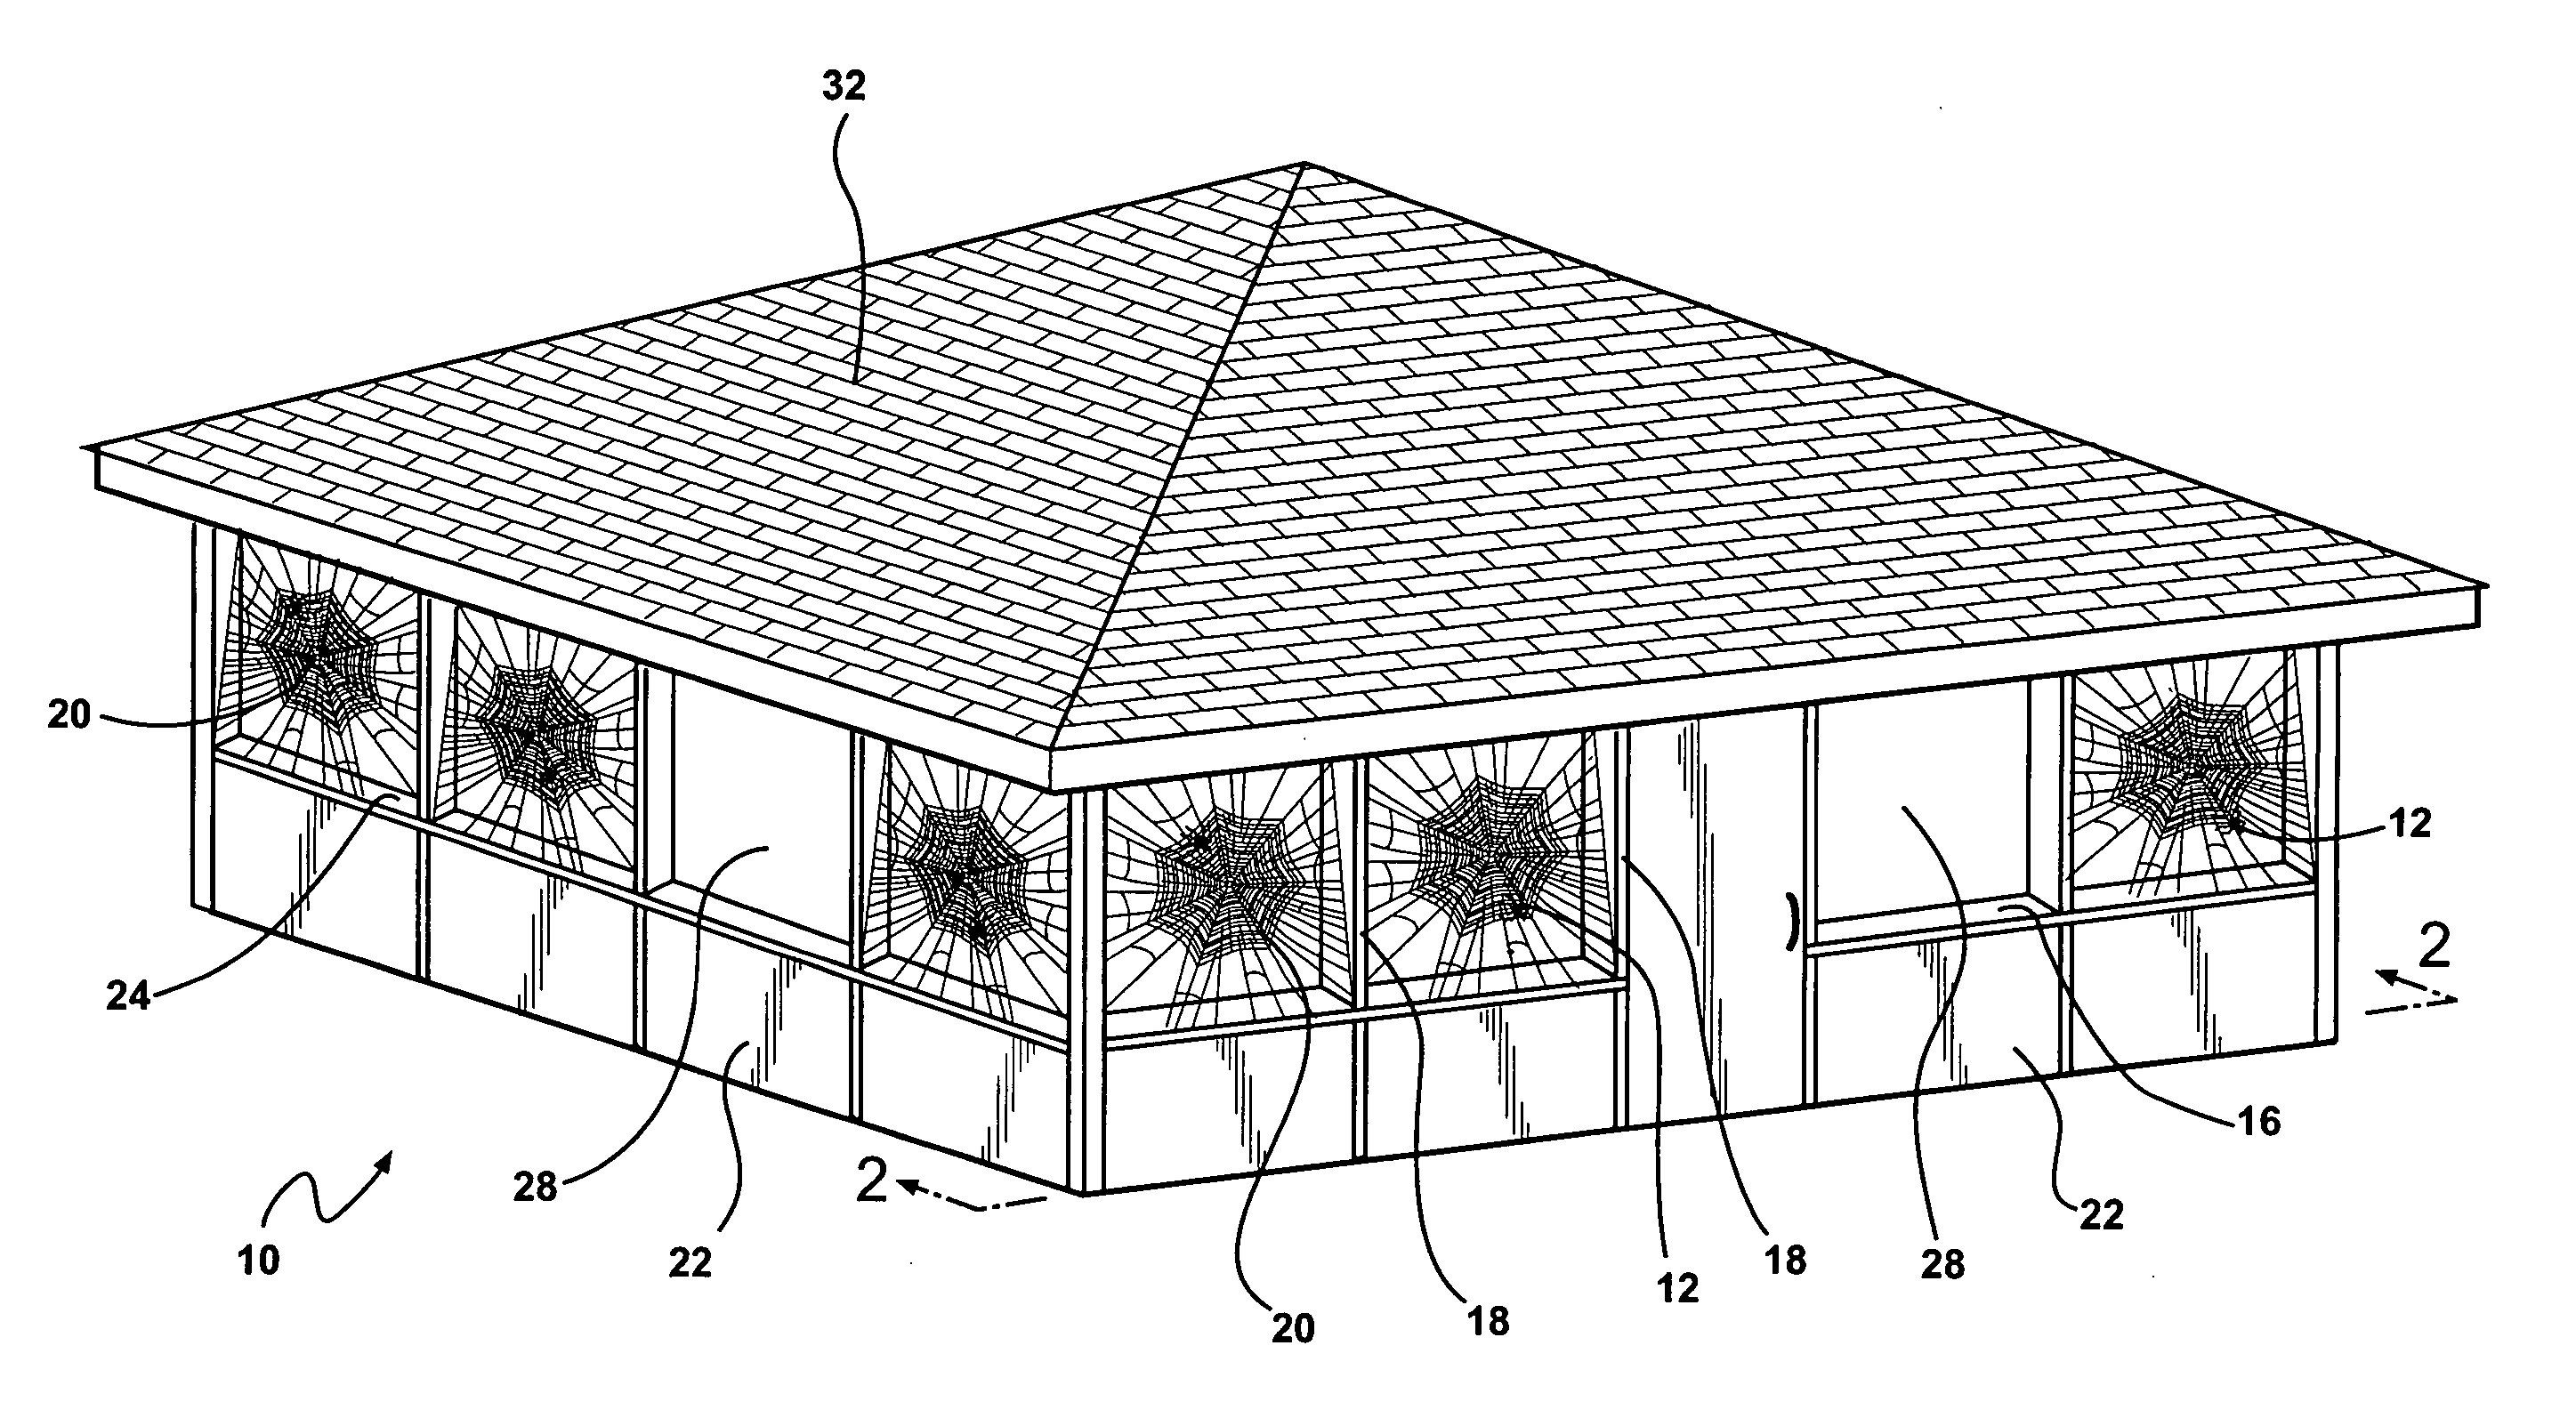 Method and housing assembly for farming members of the phylum arthropoda